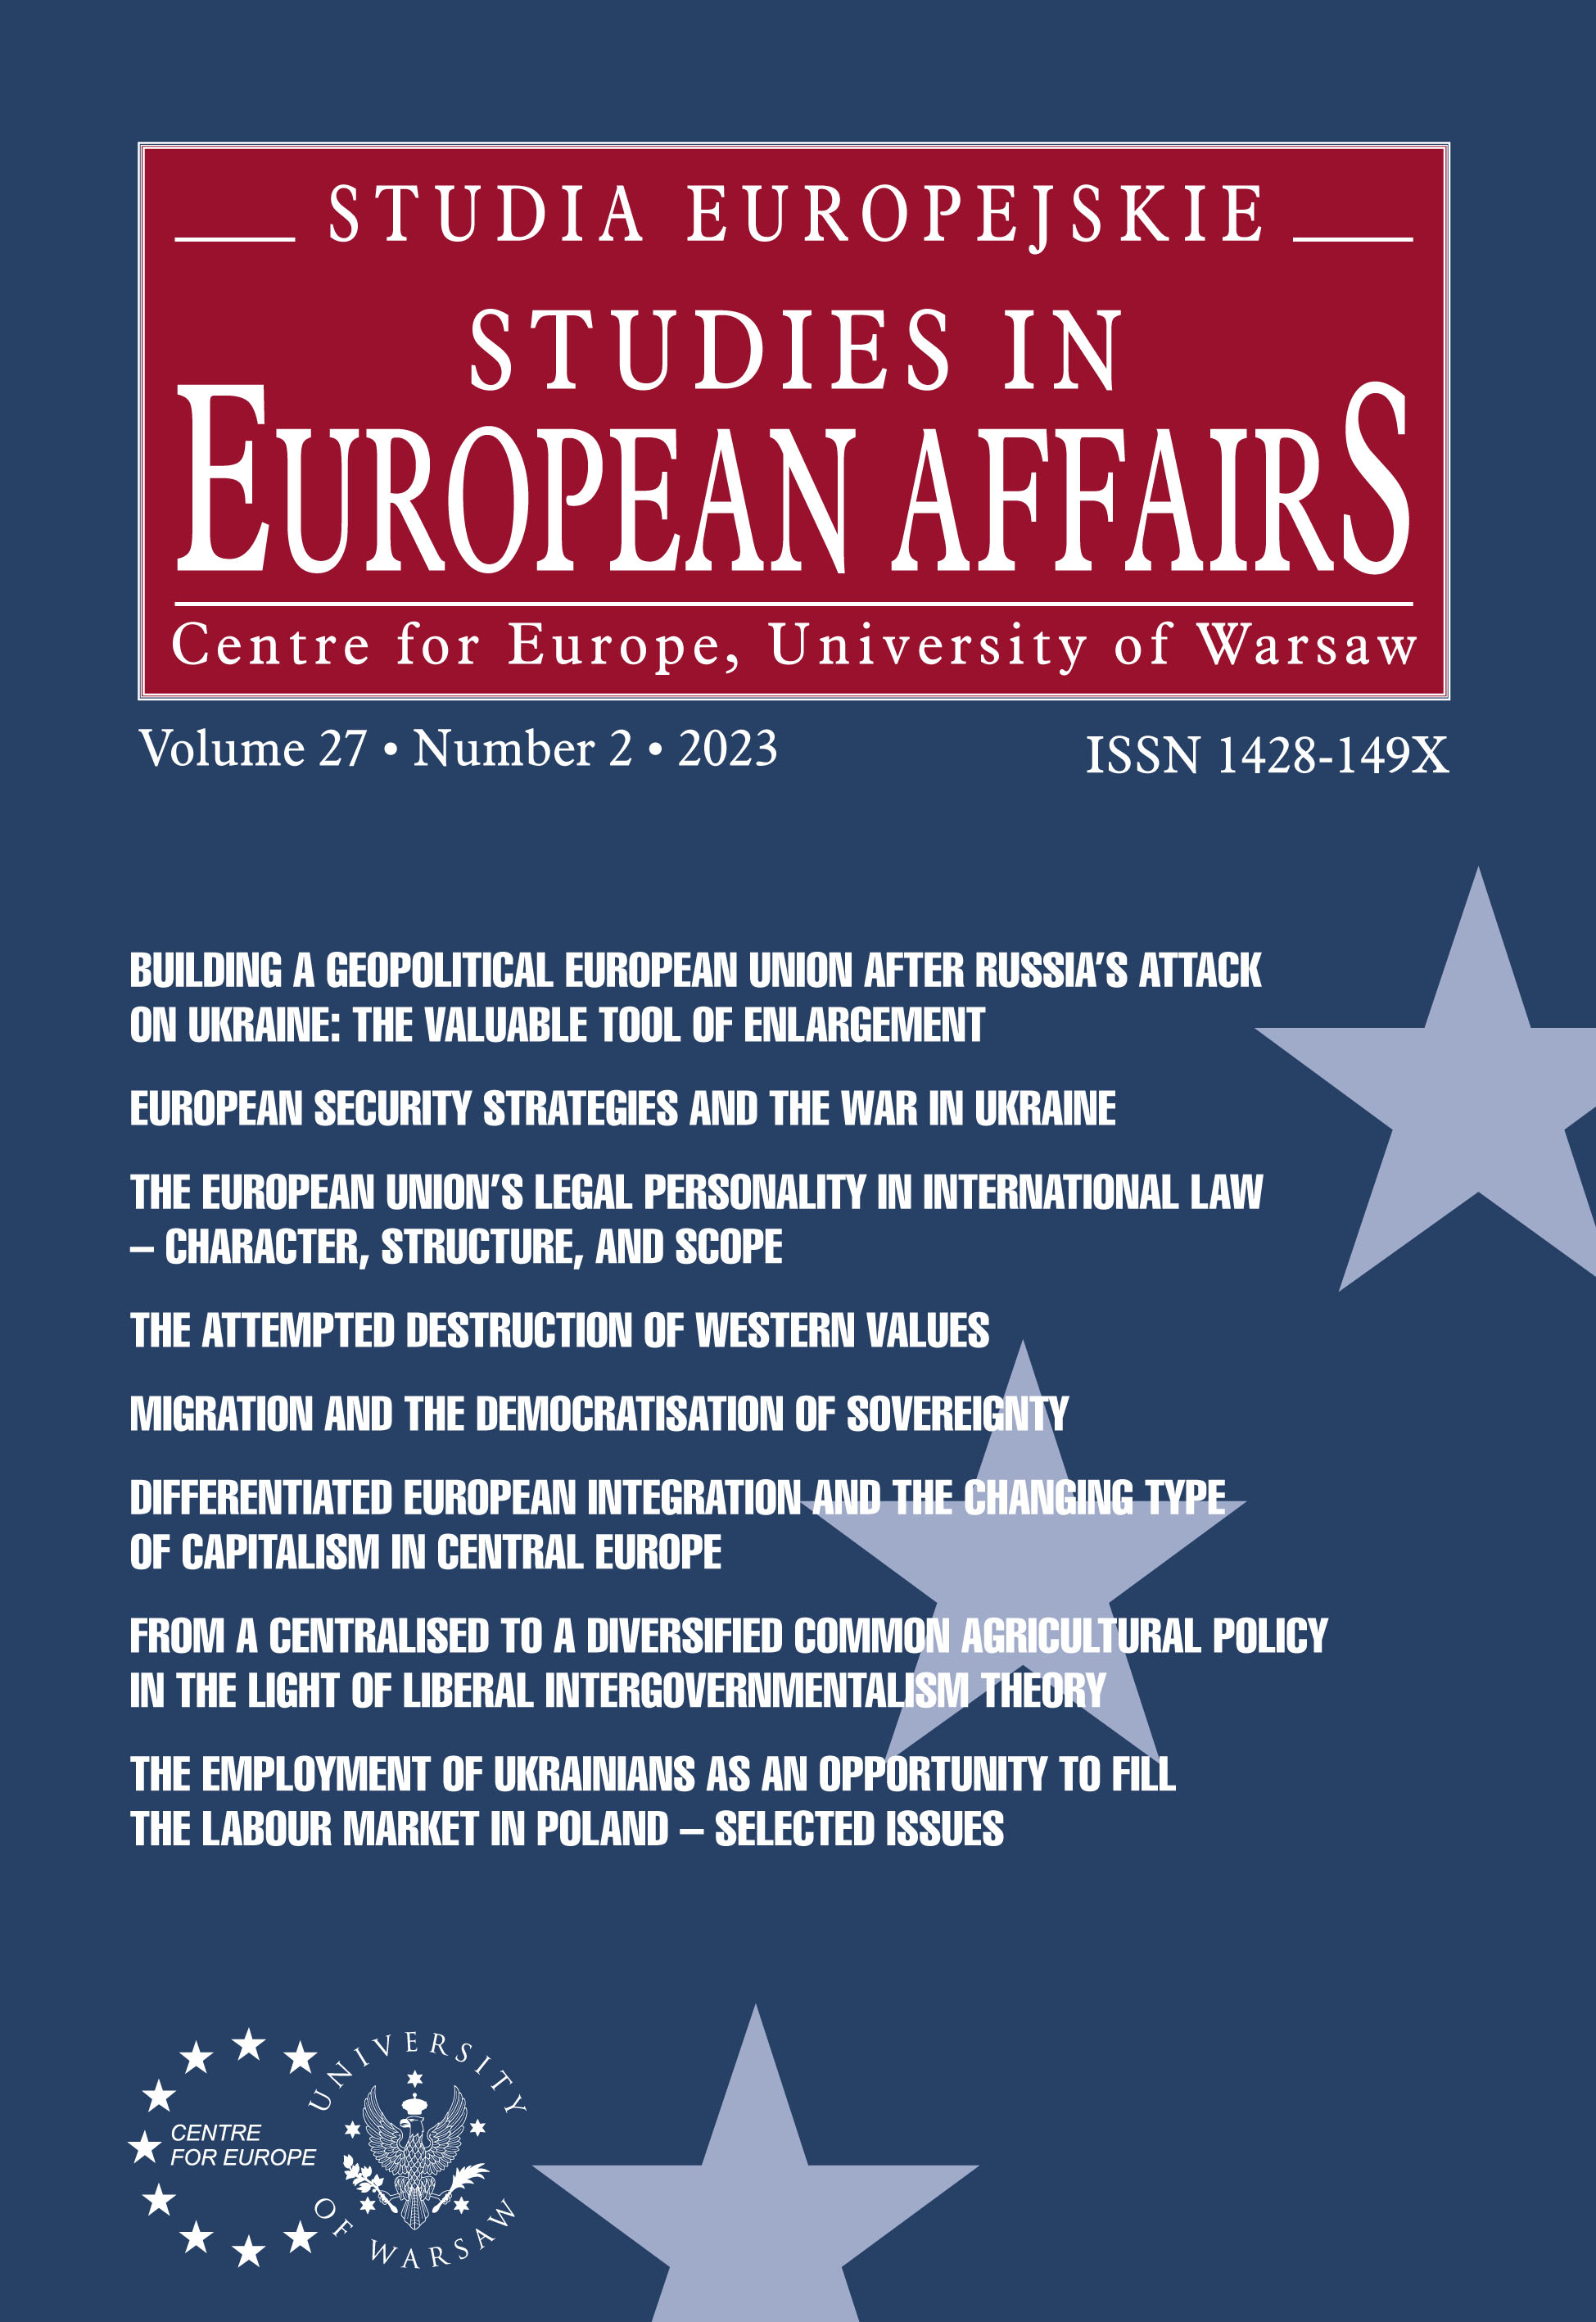 Differentiated European Integration and the Changing Type of Capitalism in Central Europe